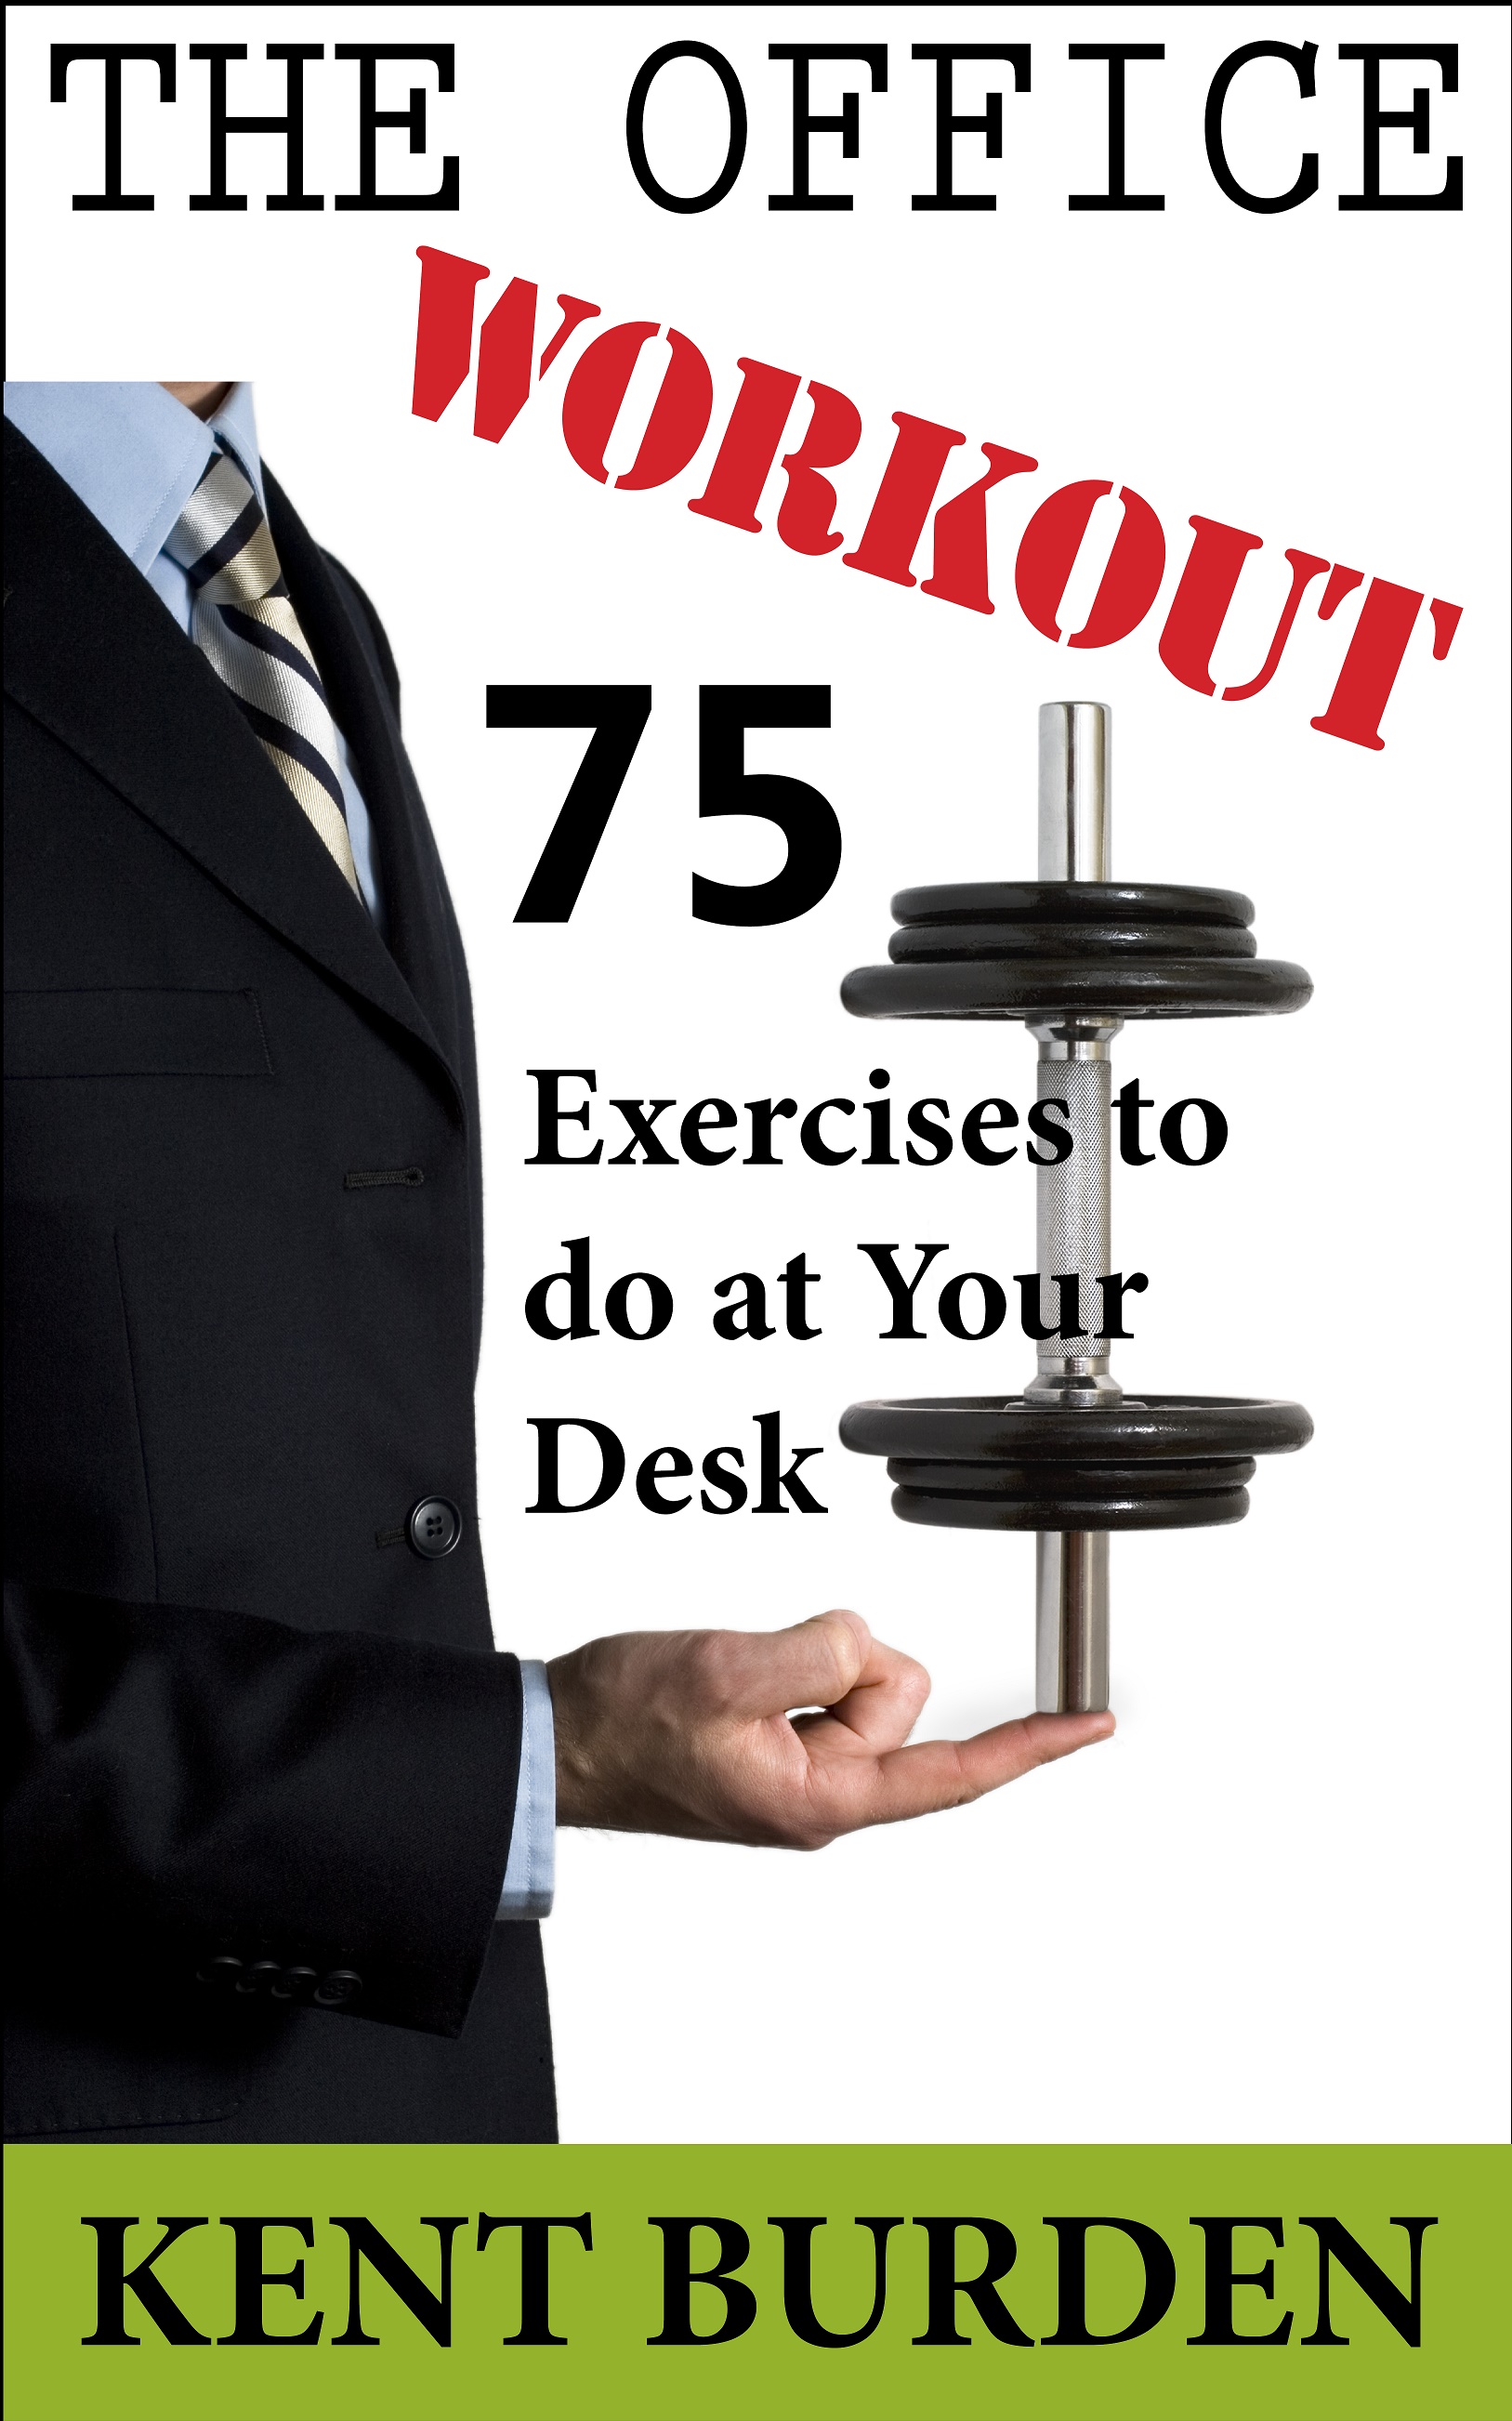 The Office Workout